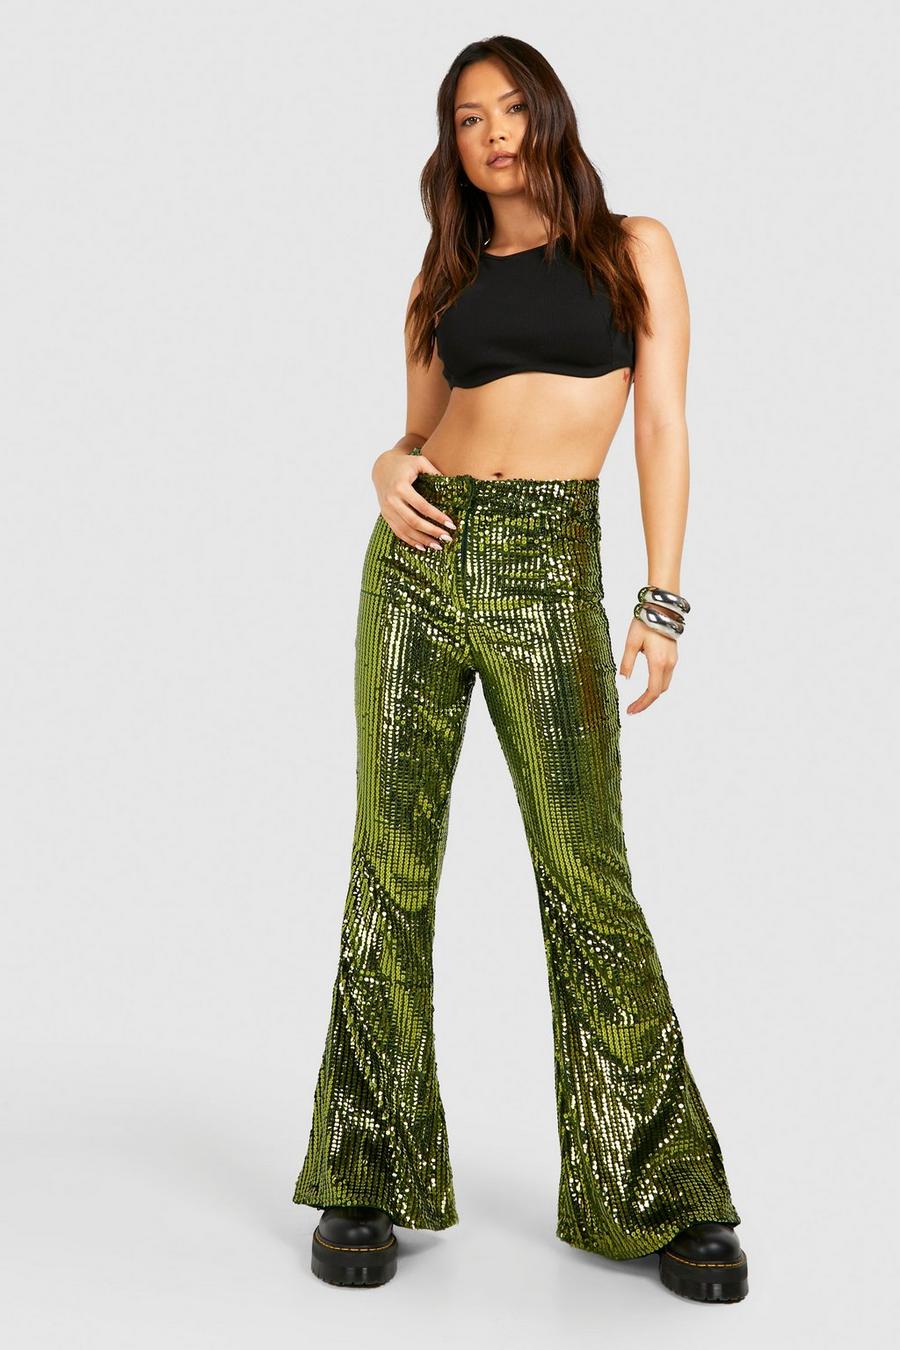 brittmerl + Dionne Flare Pants  Clothes, Flared pants outfit